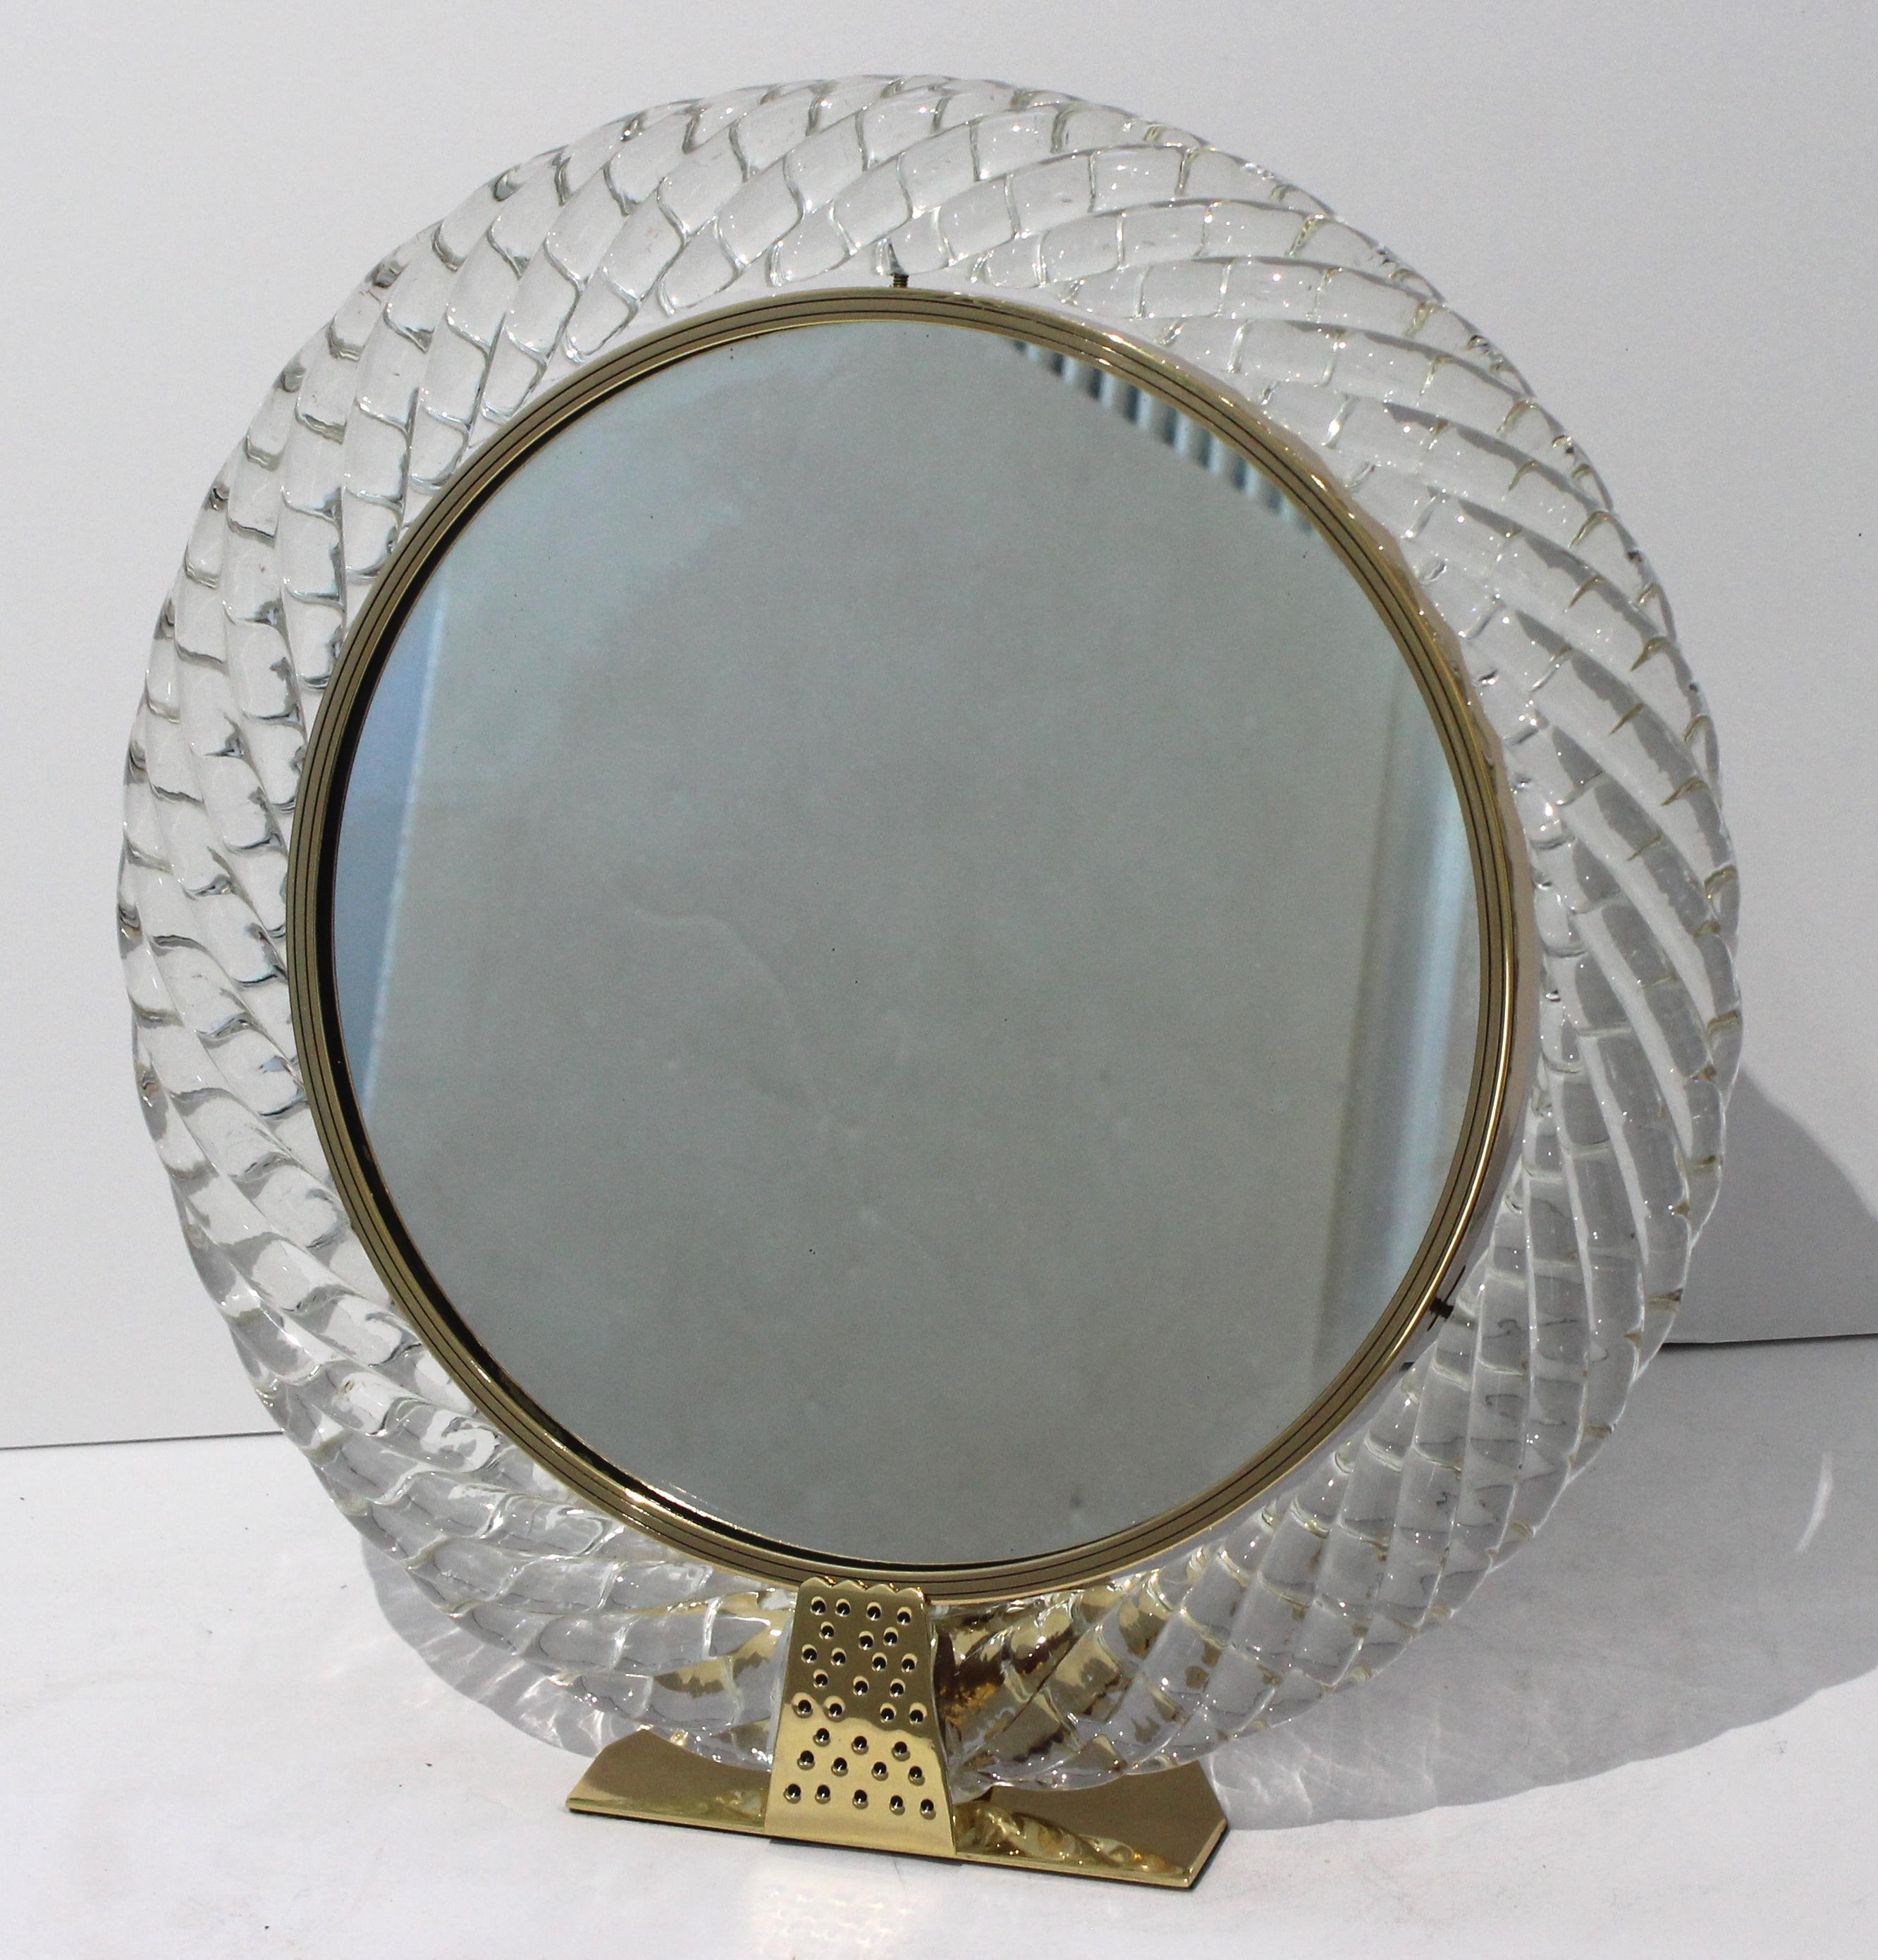 1930s Art Deco Barovier Et Toso Murano Vanity mirror with gold bronze stand from a Palm Beach estate.